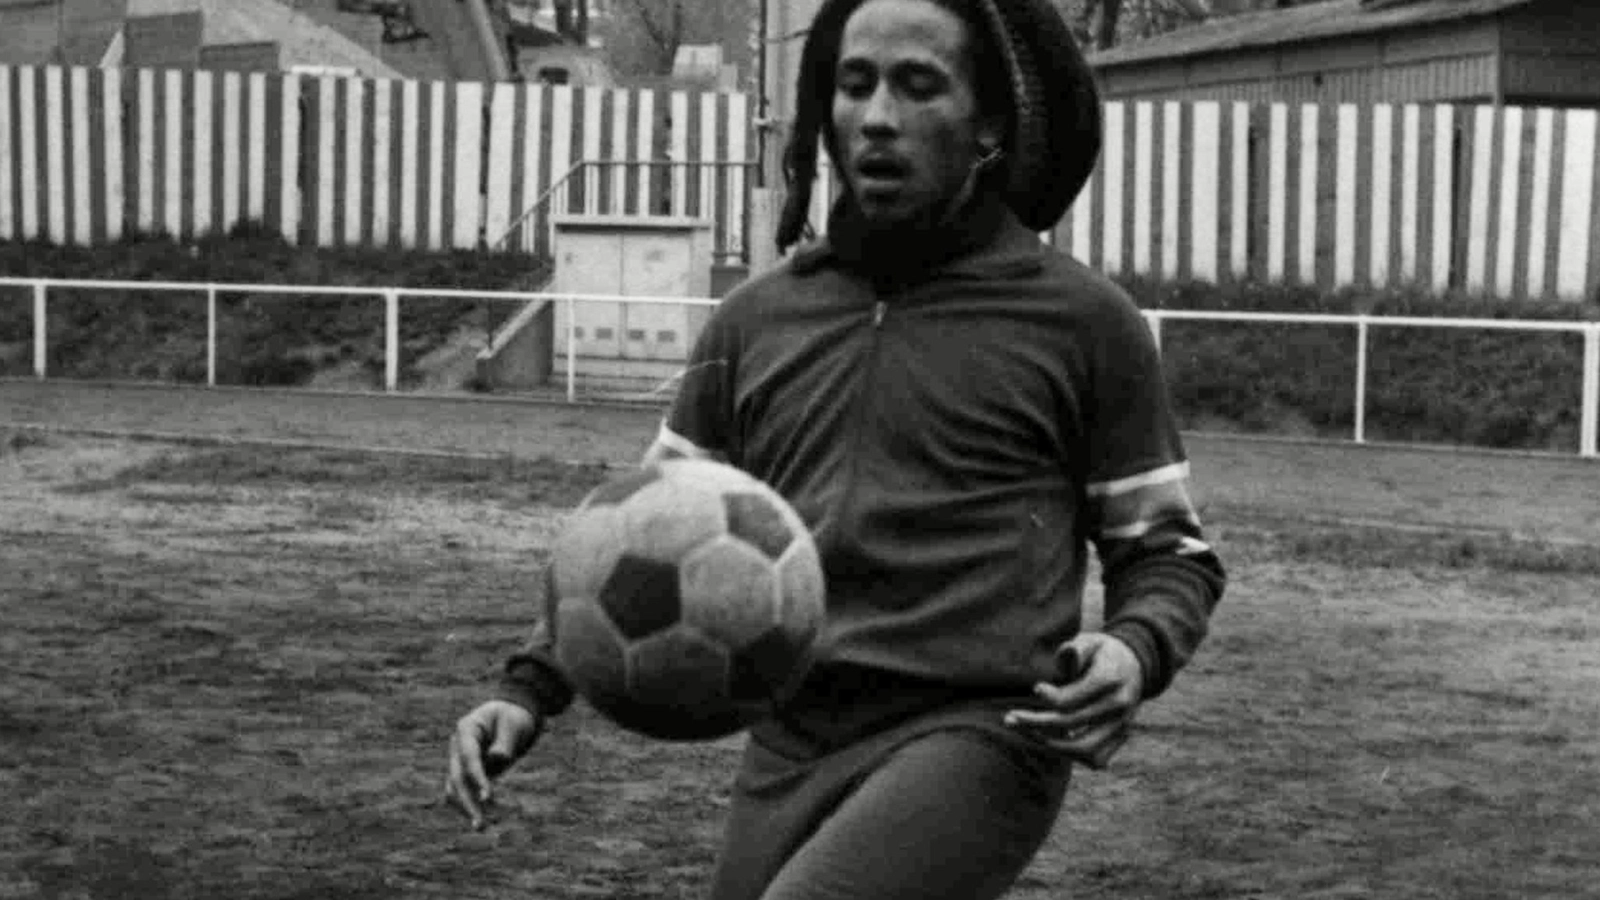 Reggae legend and football fan Bob Marley, in dreadlocks and beard and wearing a dark jersey, dribbles a football. From ‘Legacy: Rhythm of the Game.